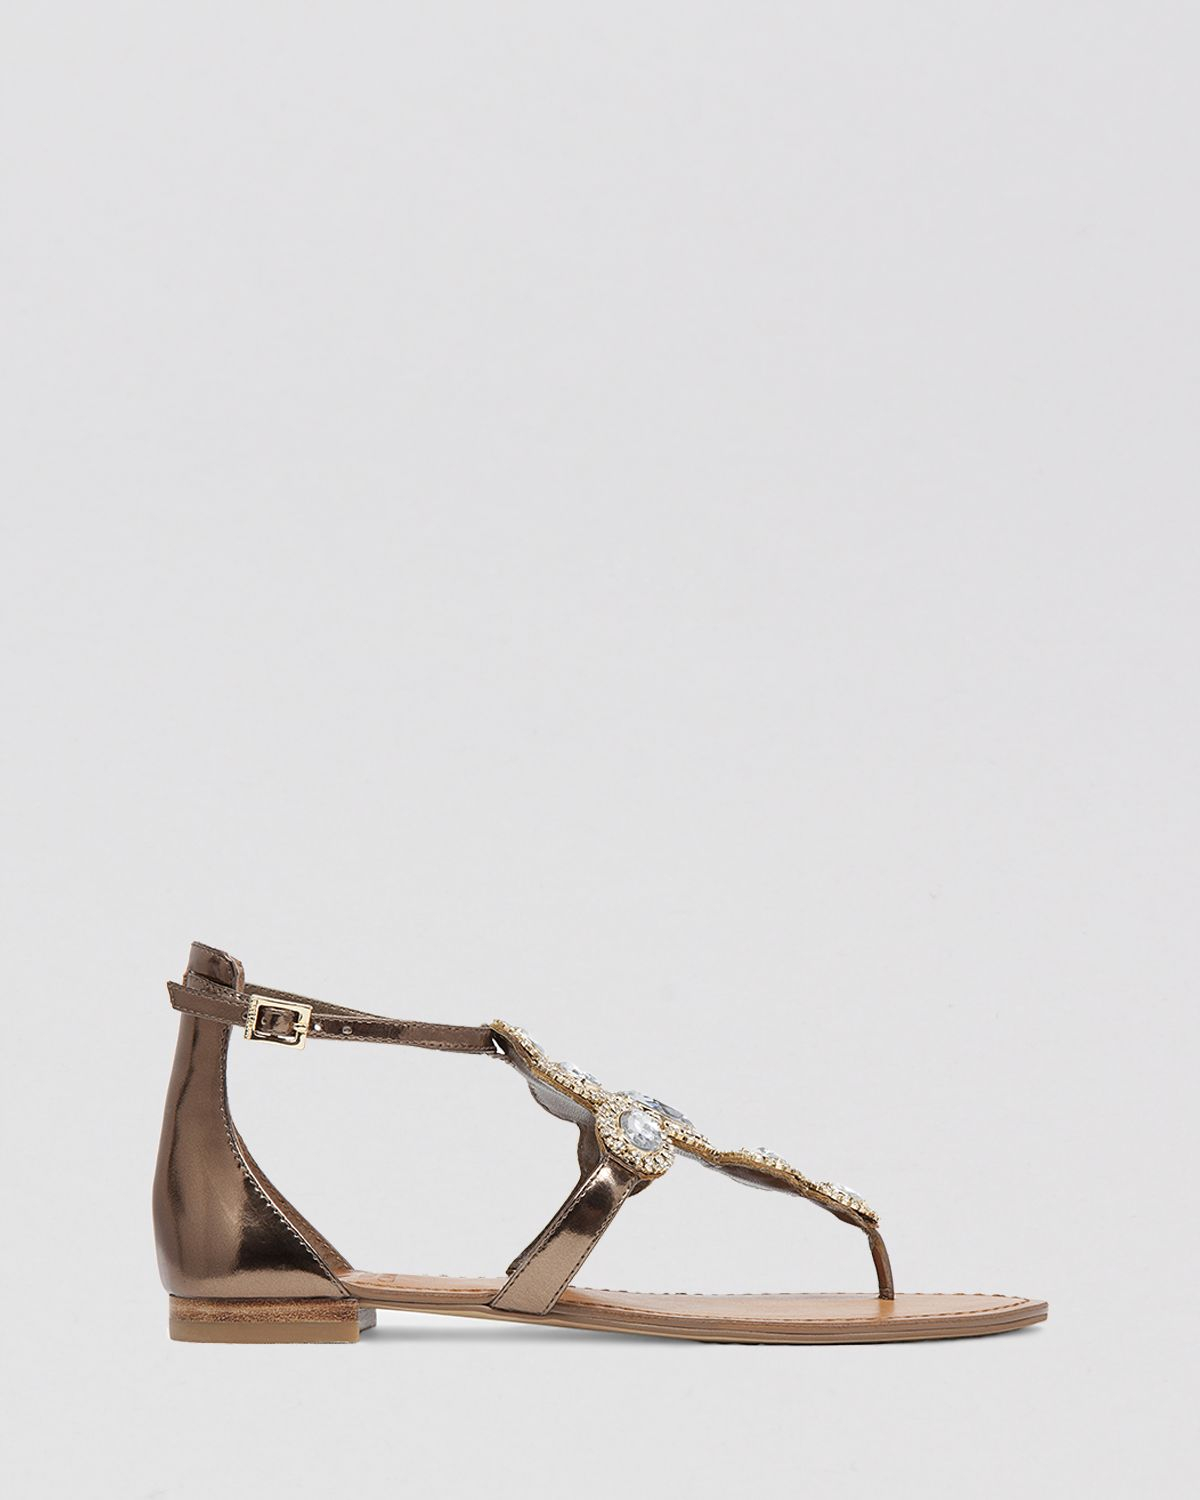 Vince camuto Jeweled Thong Flat Sandals - Manelle in Gold (Bronze) | Lyst